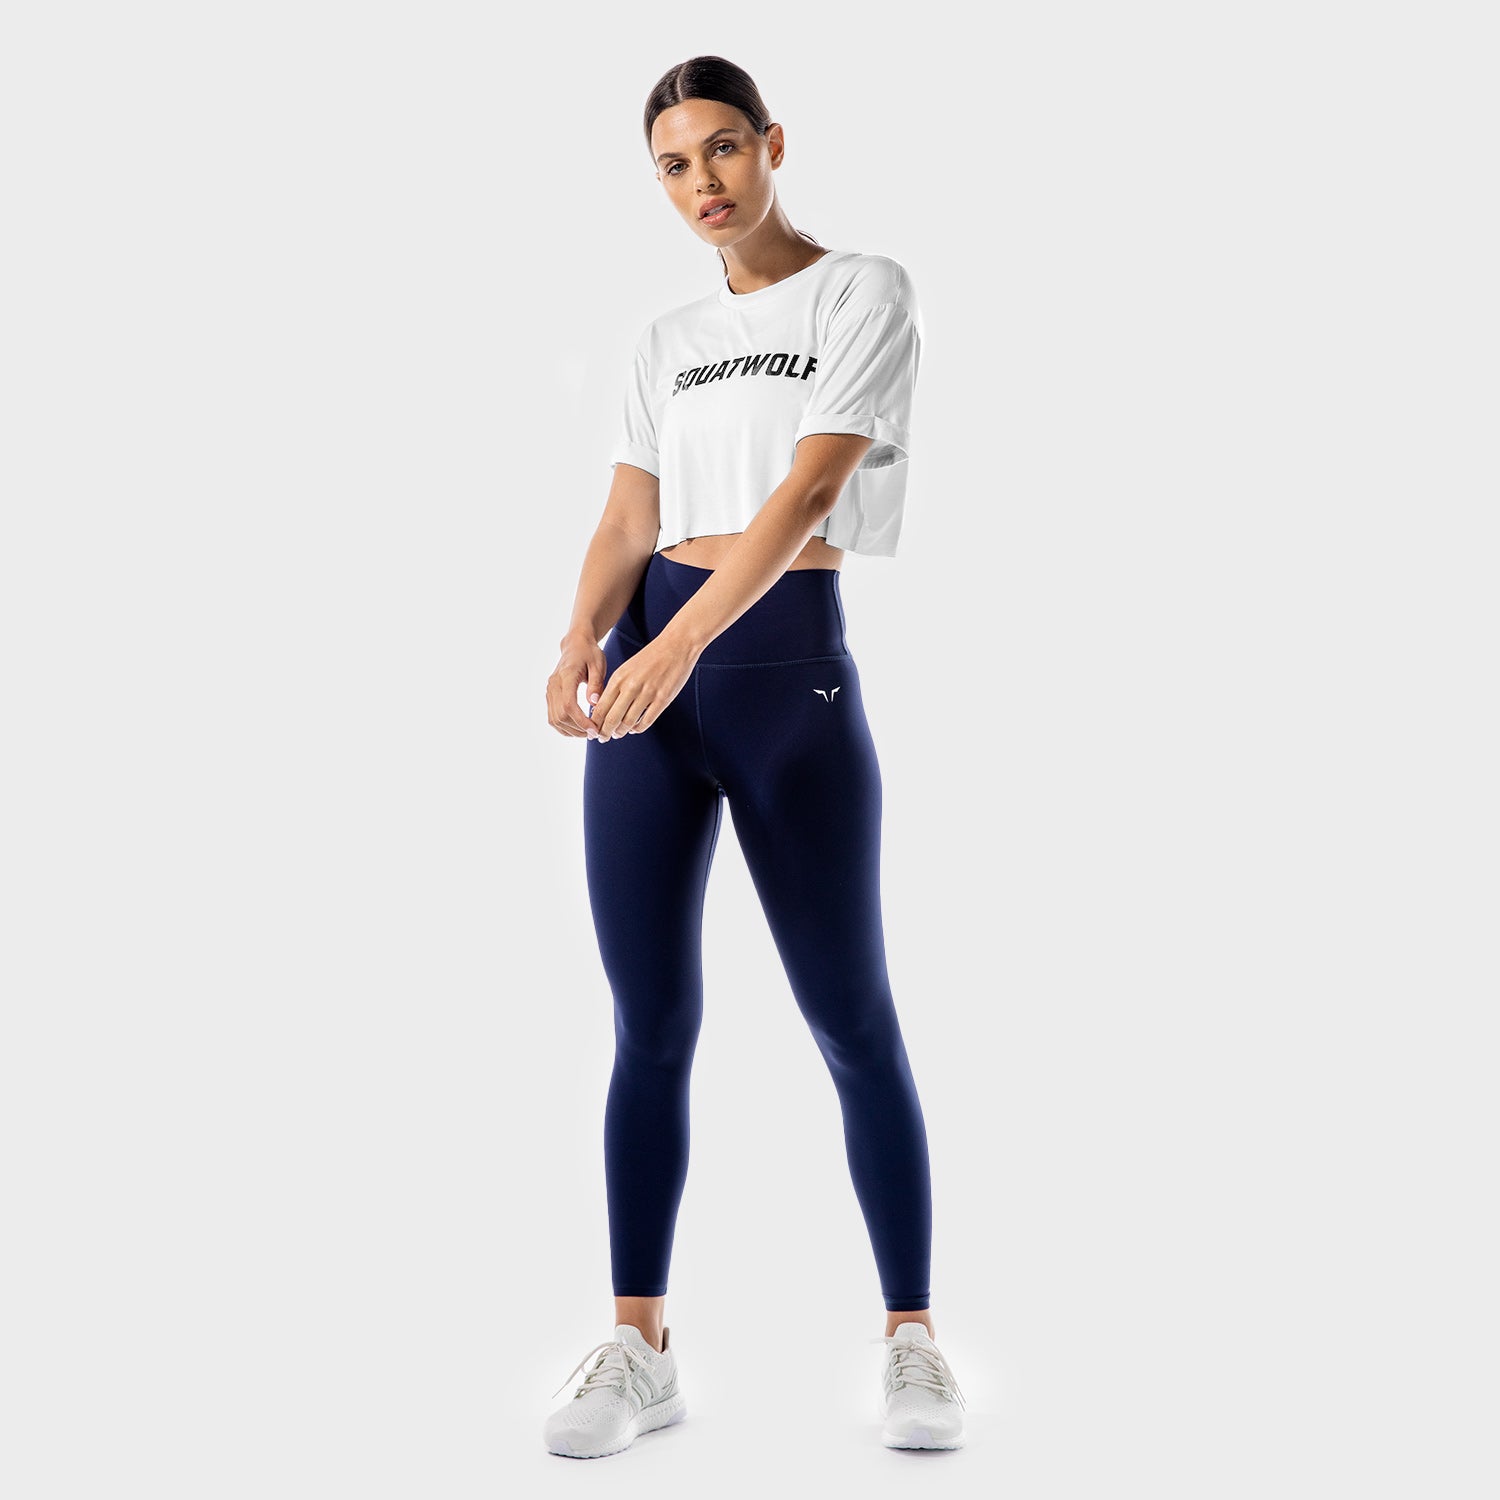 squatwolf-gym-t-shirts-for-women-iconic-crop-tee-white-workout-clothes